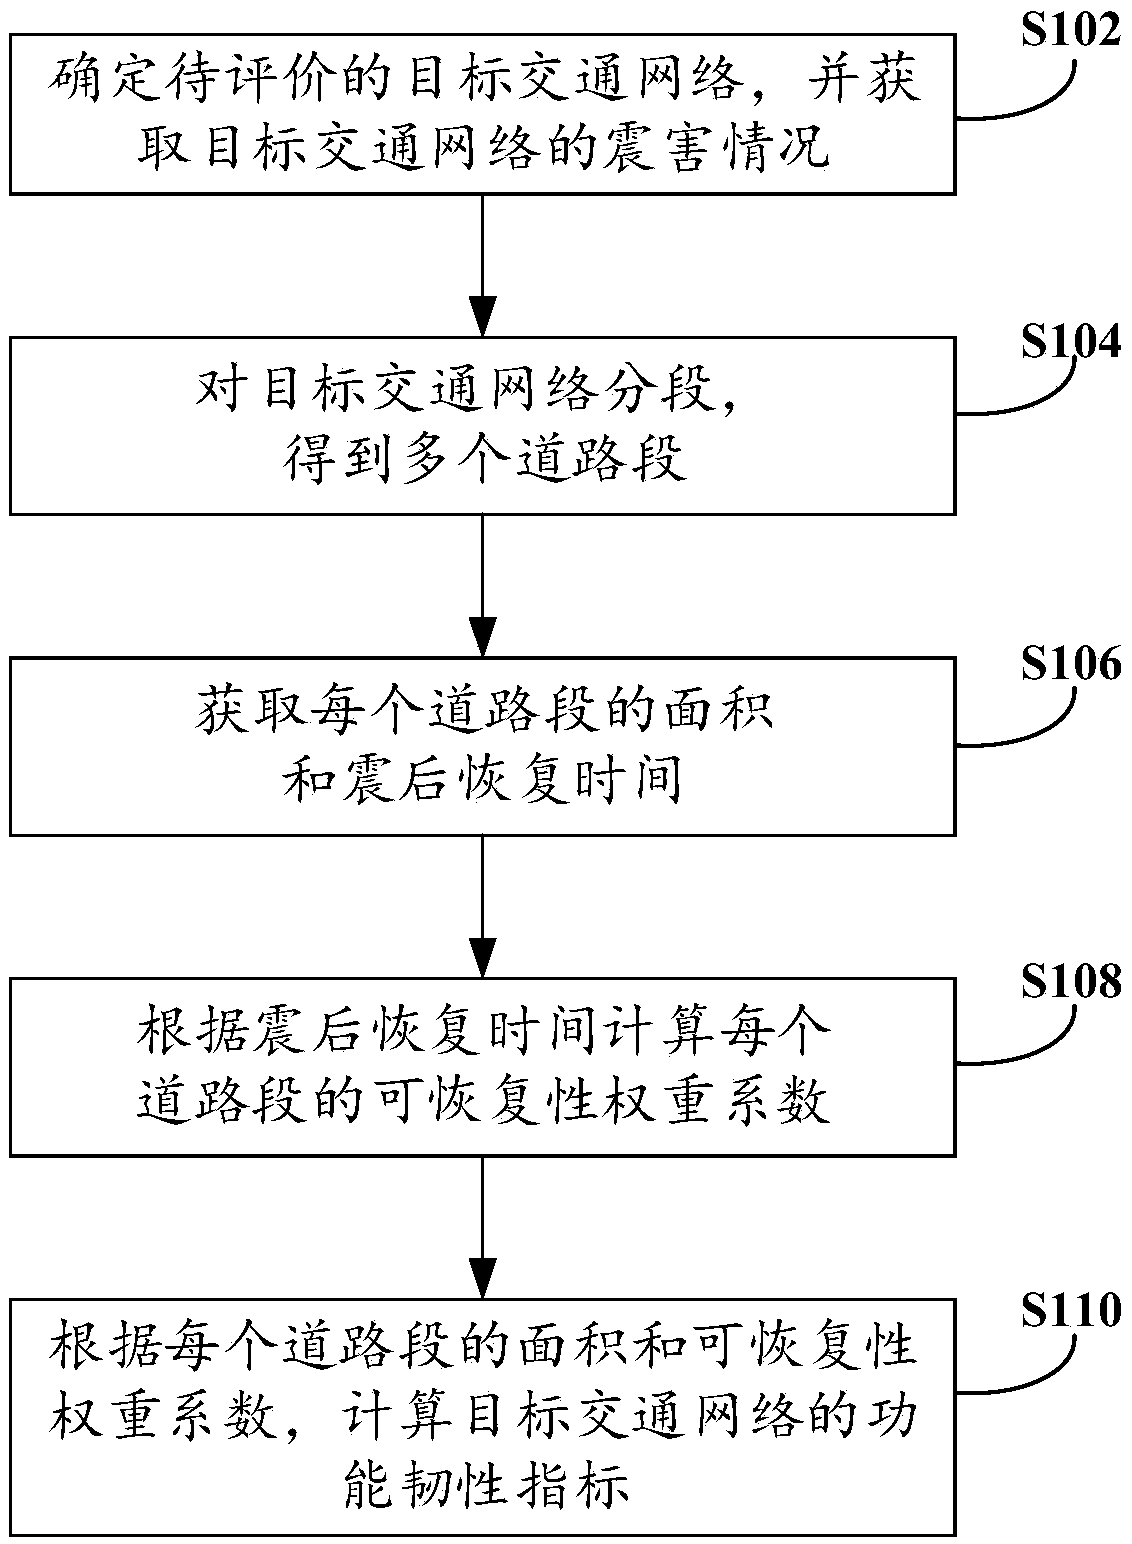 Method and device for evaluating function toughness for road traffic after earthquake